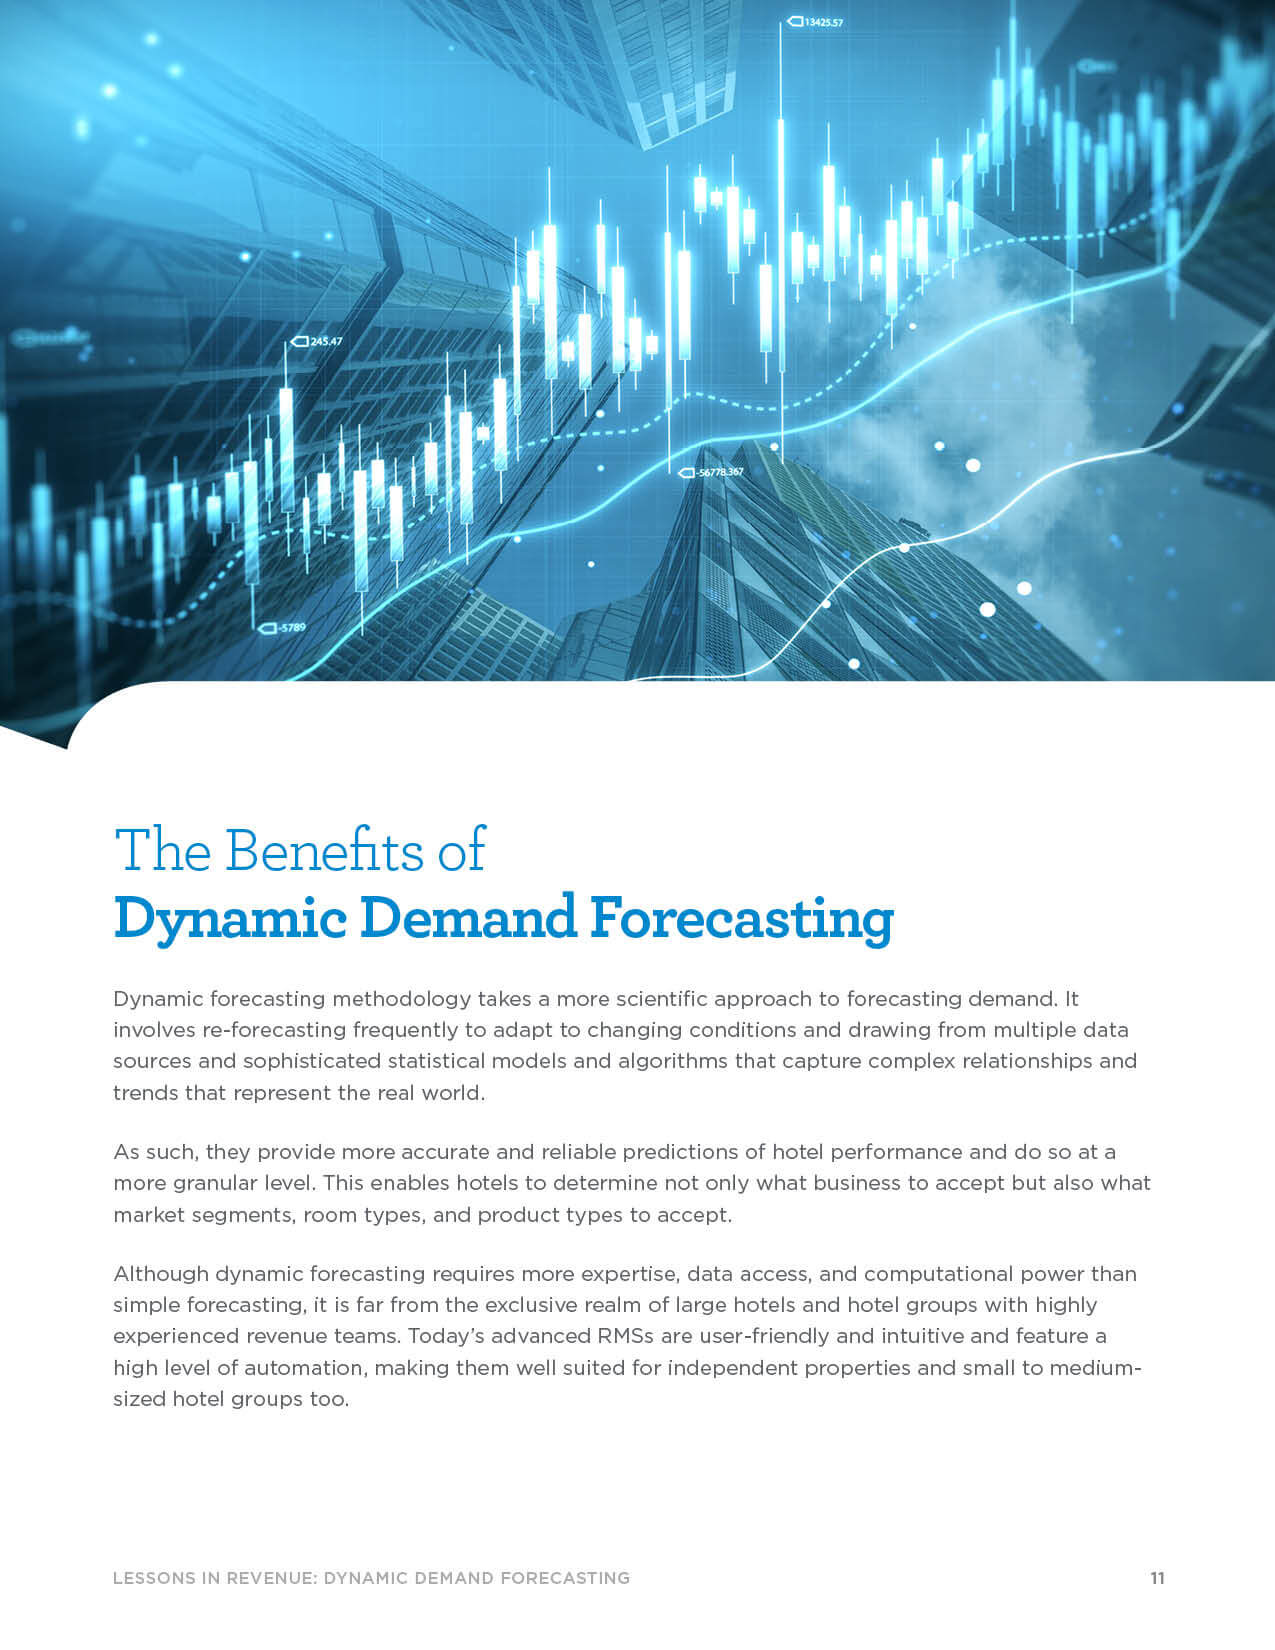 Page 11 - The Benefits of Dynamic Demand Forecasting